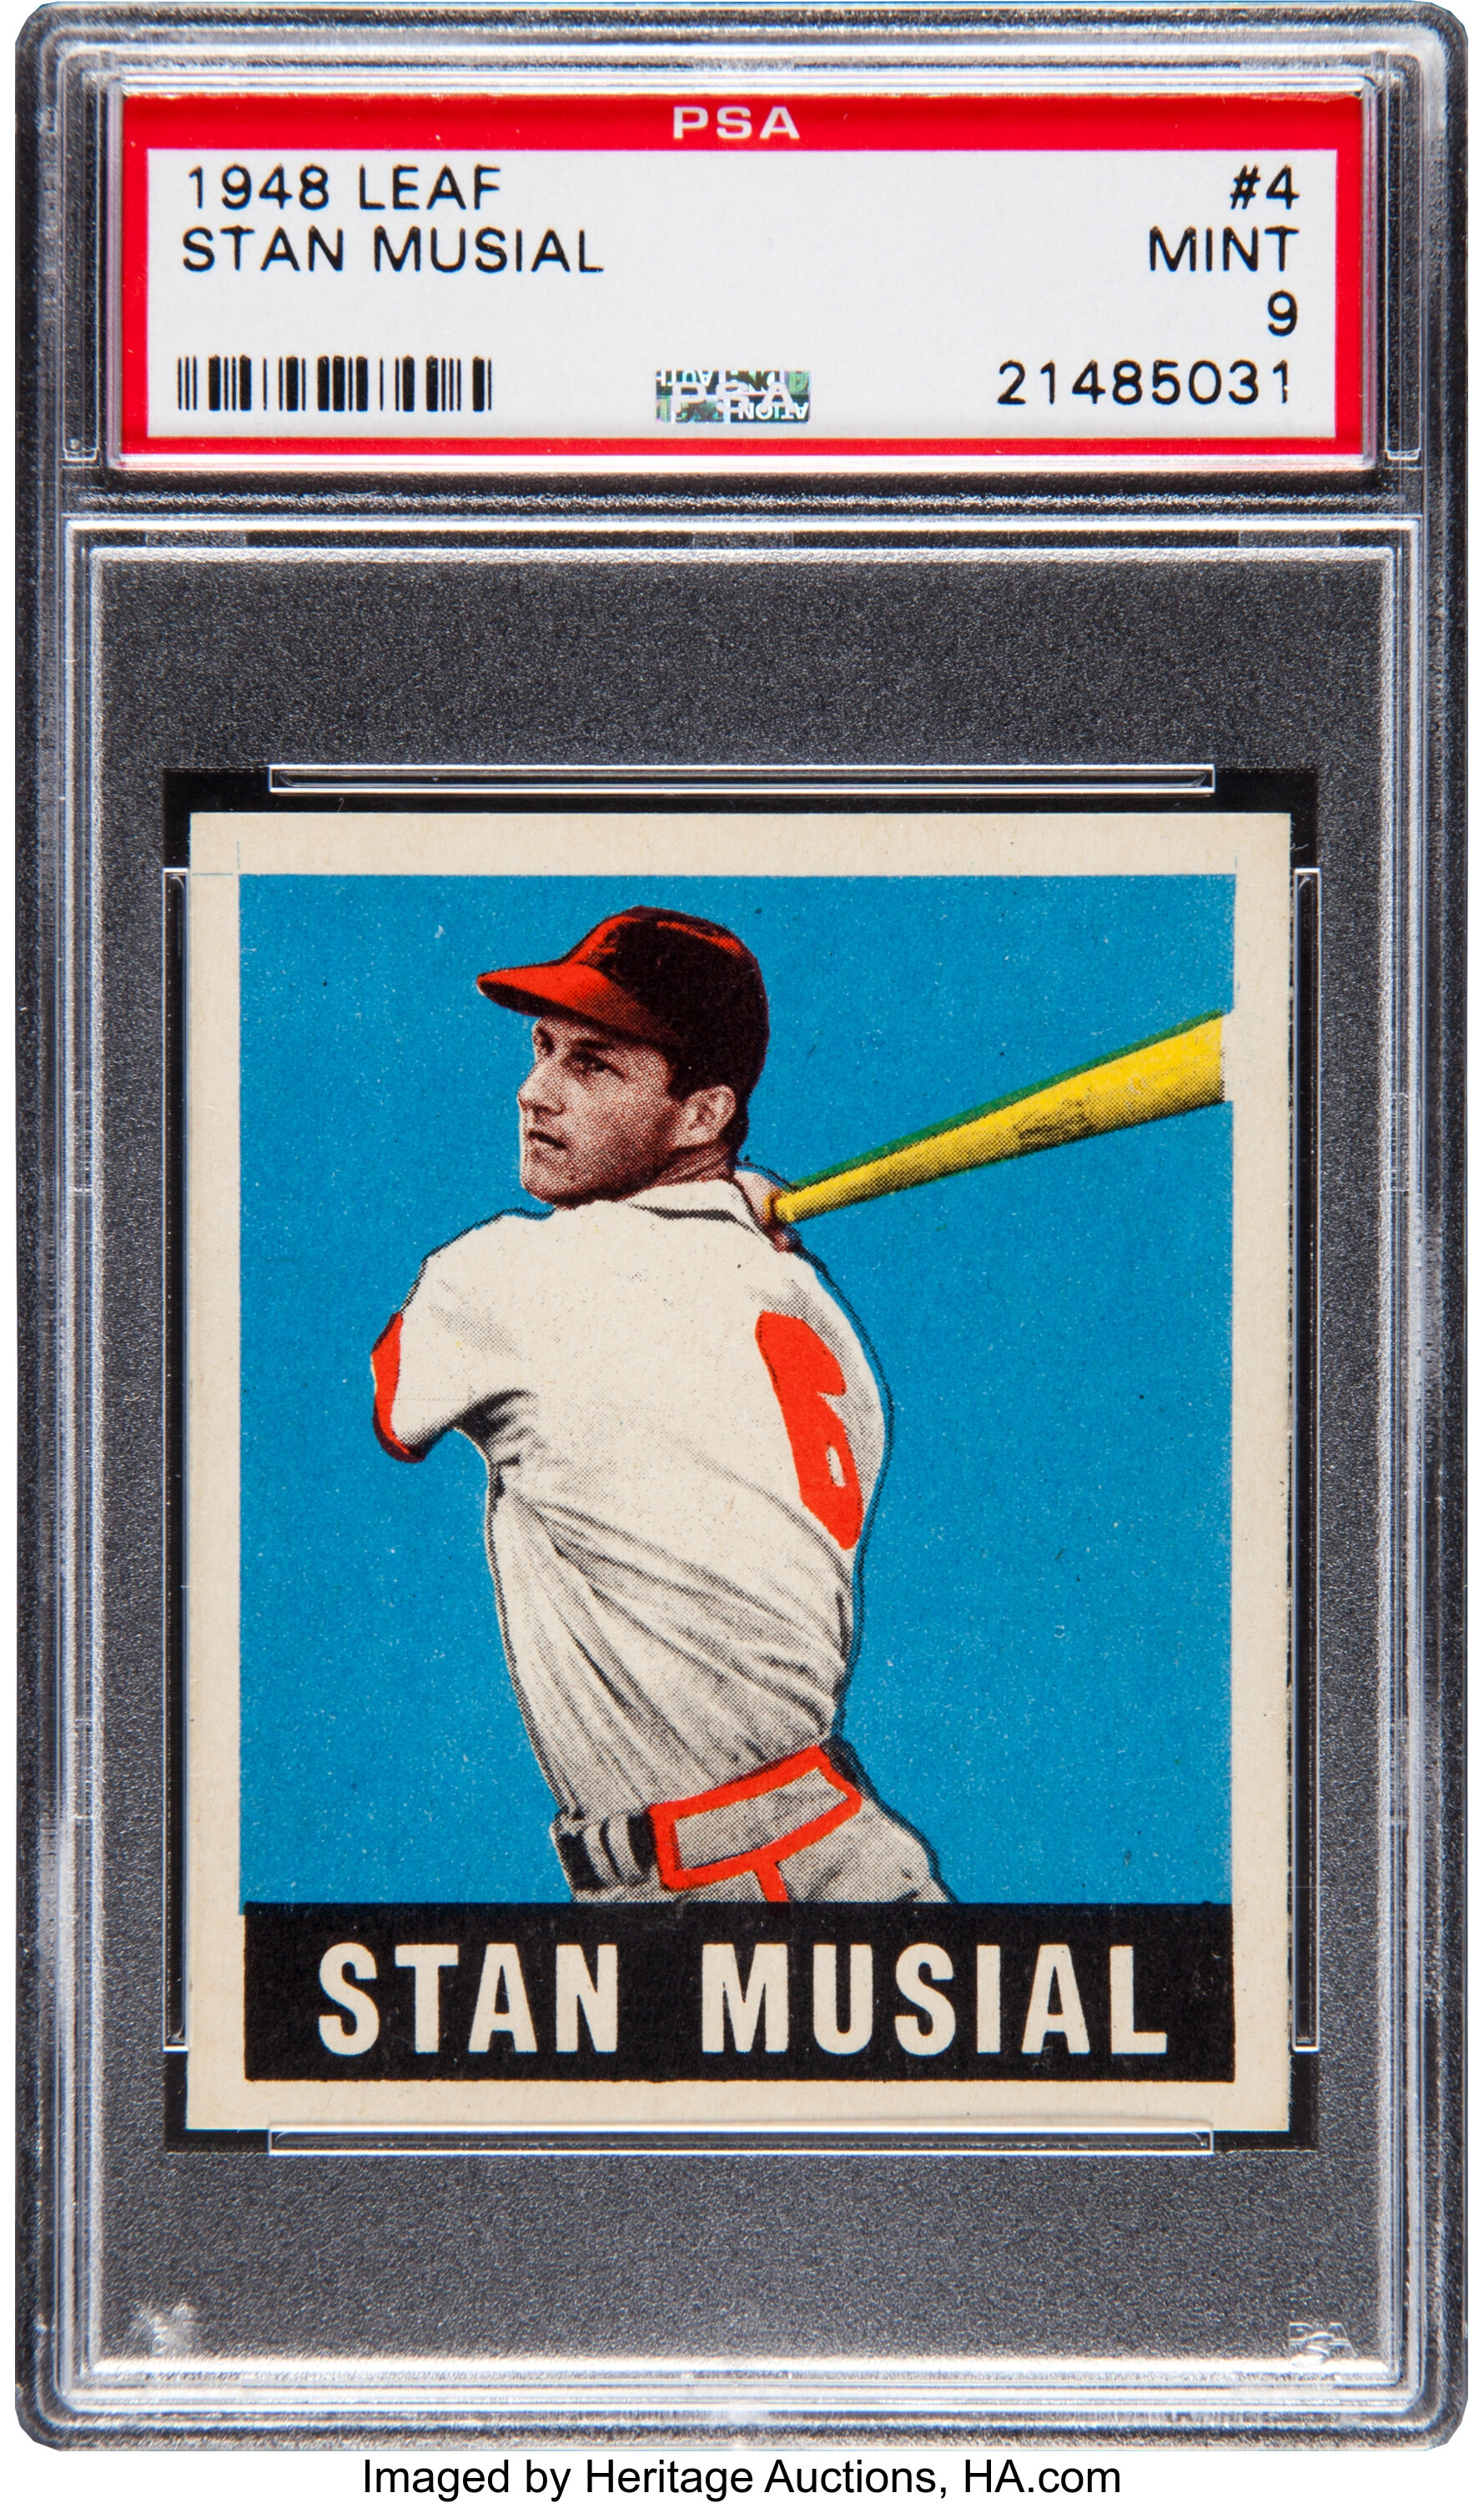 Lot - TWO AUTOGRAPHED STAN MUSIAL IMAGES